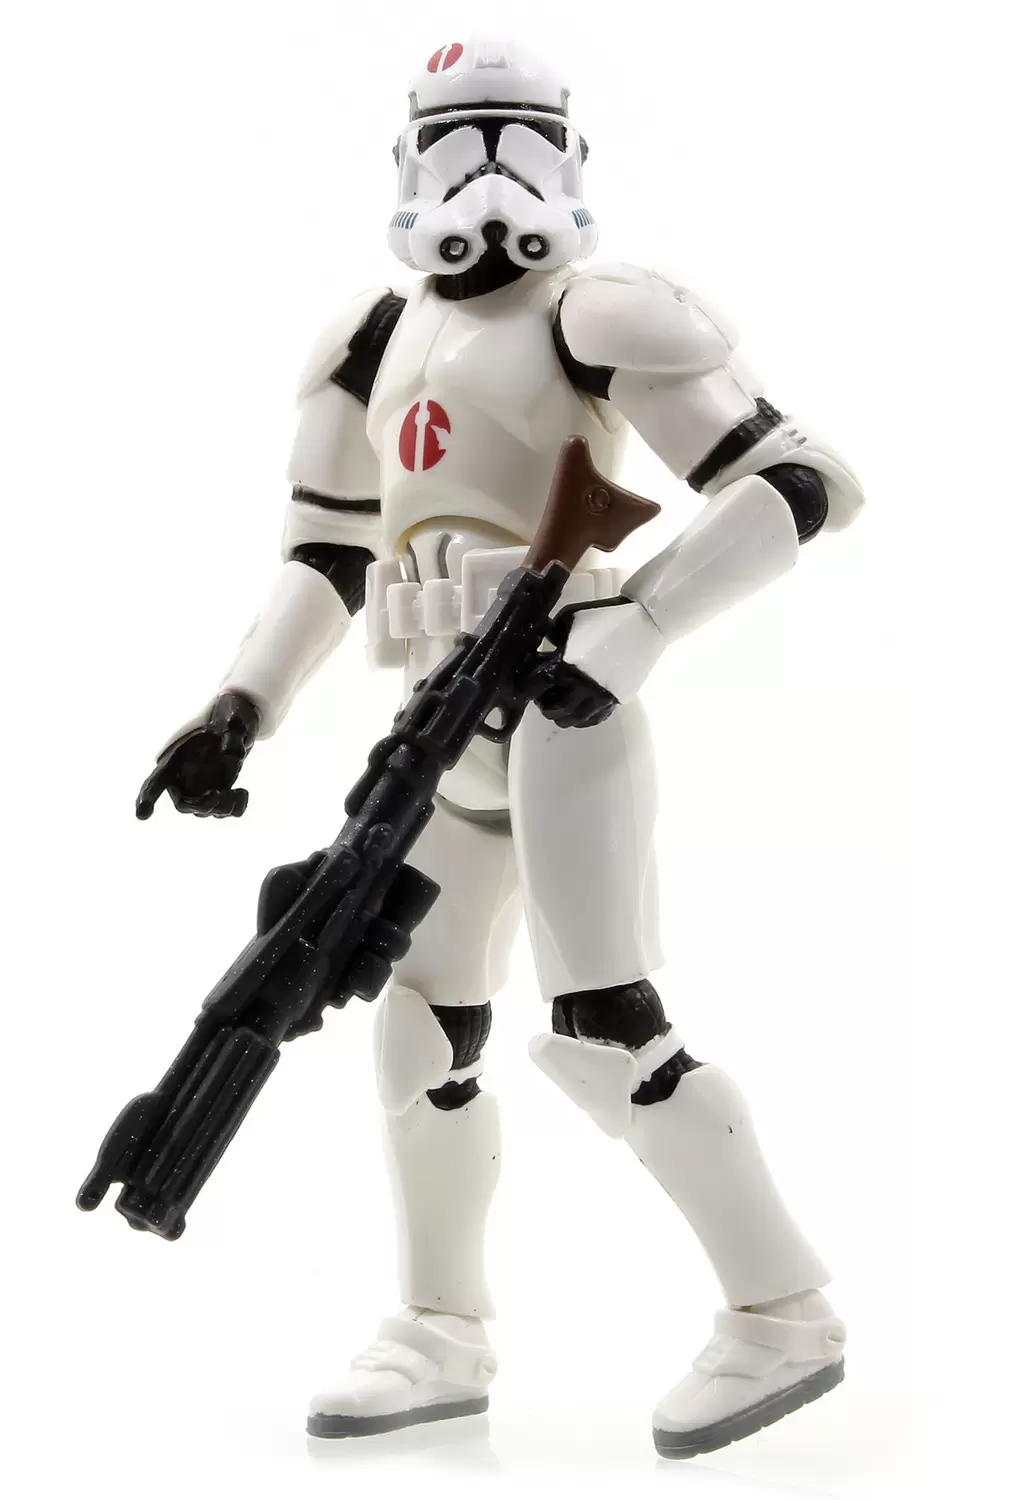 Revenge of the Sith - Clone Trooper (Target)